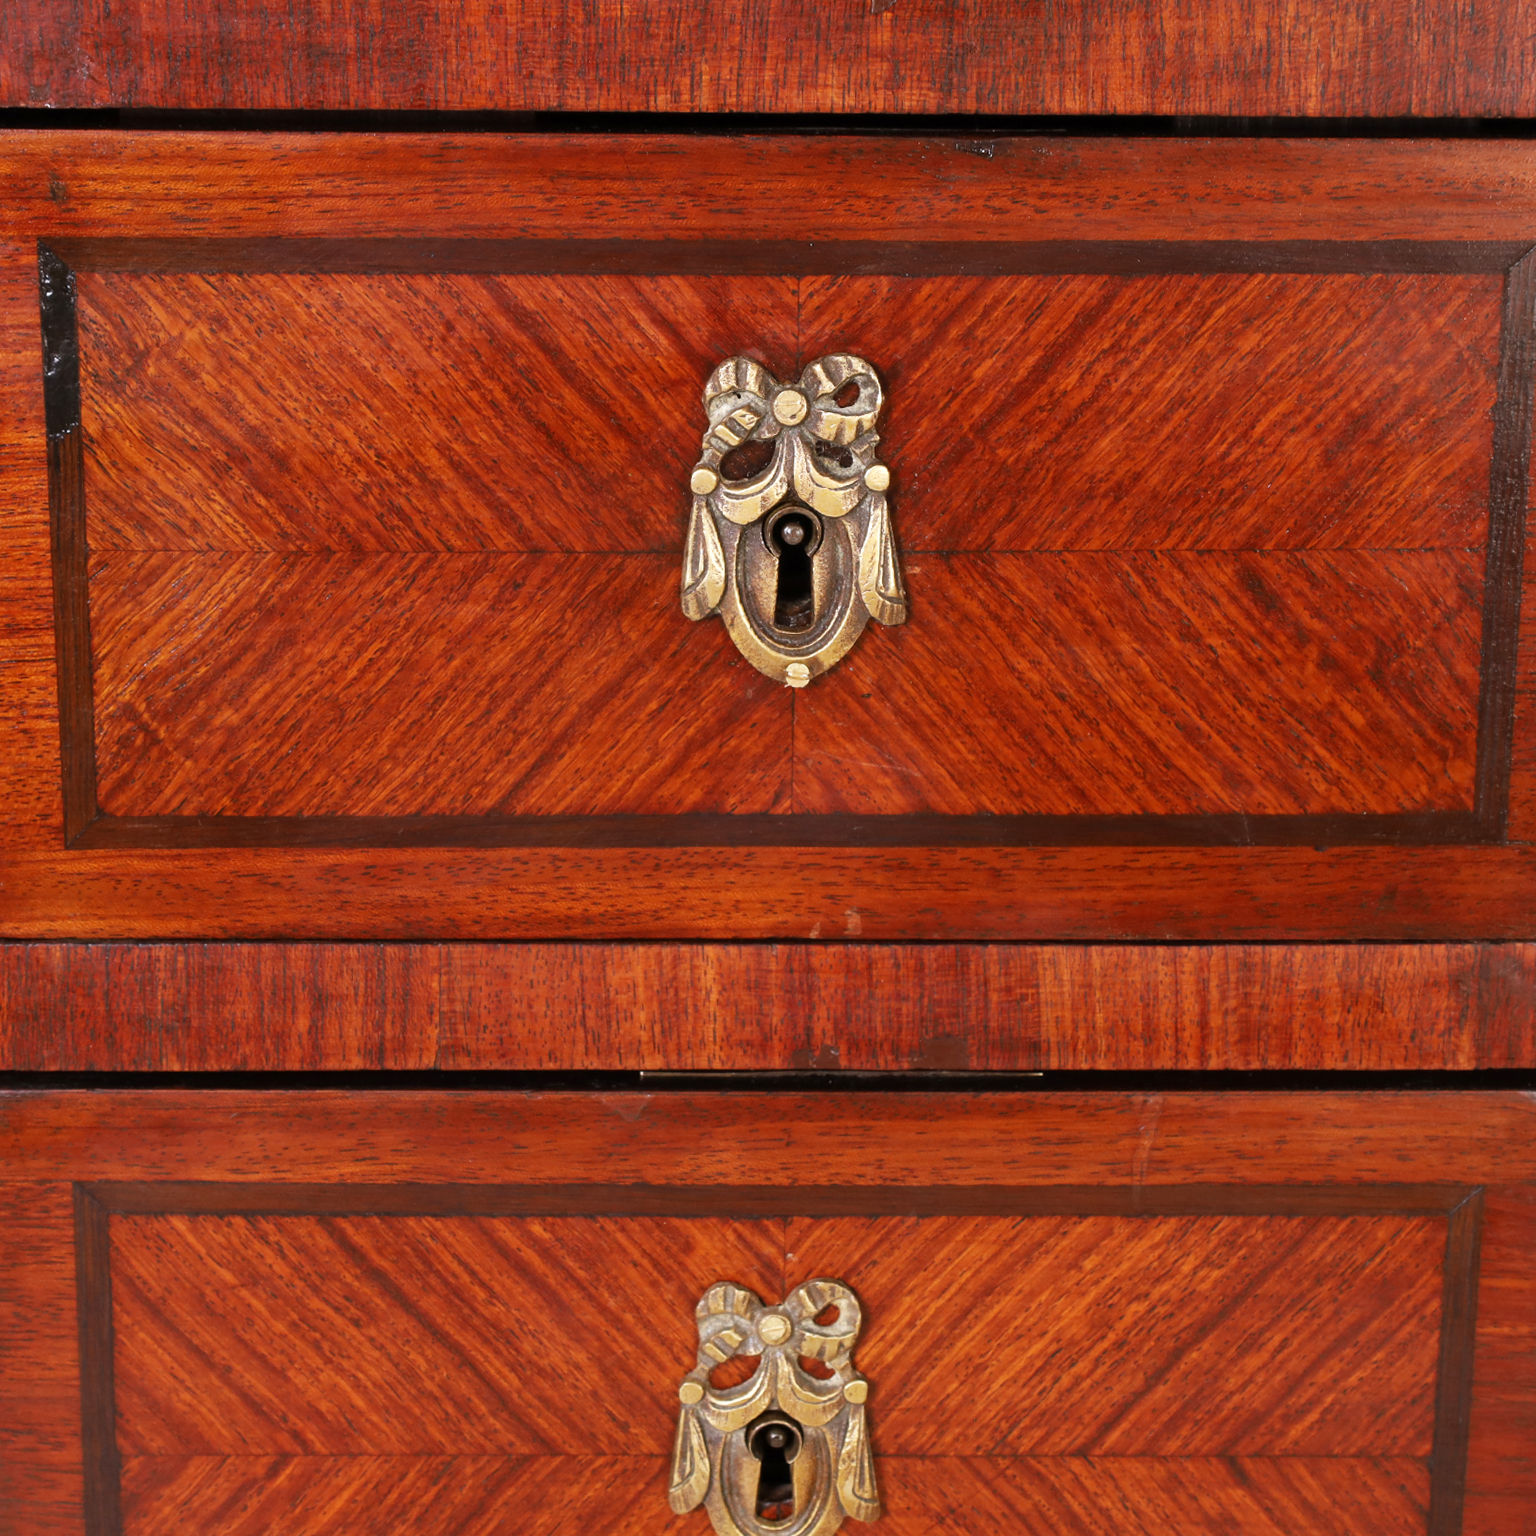 Pair of Antique French Louis XV Style Lingerie Chests or Semainiers